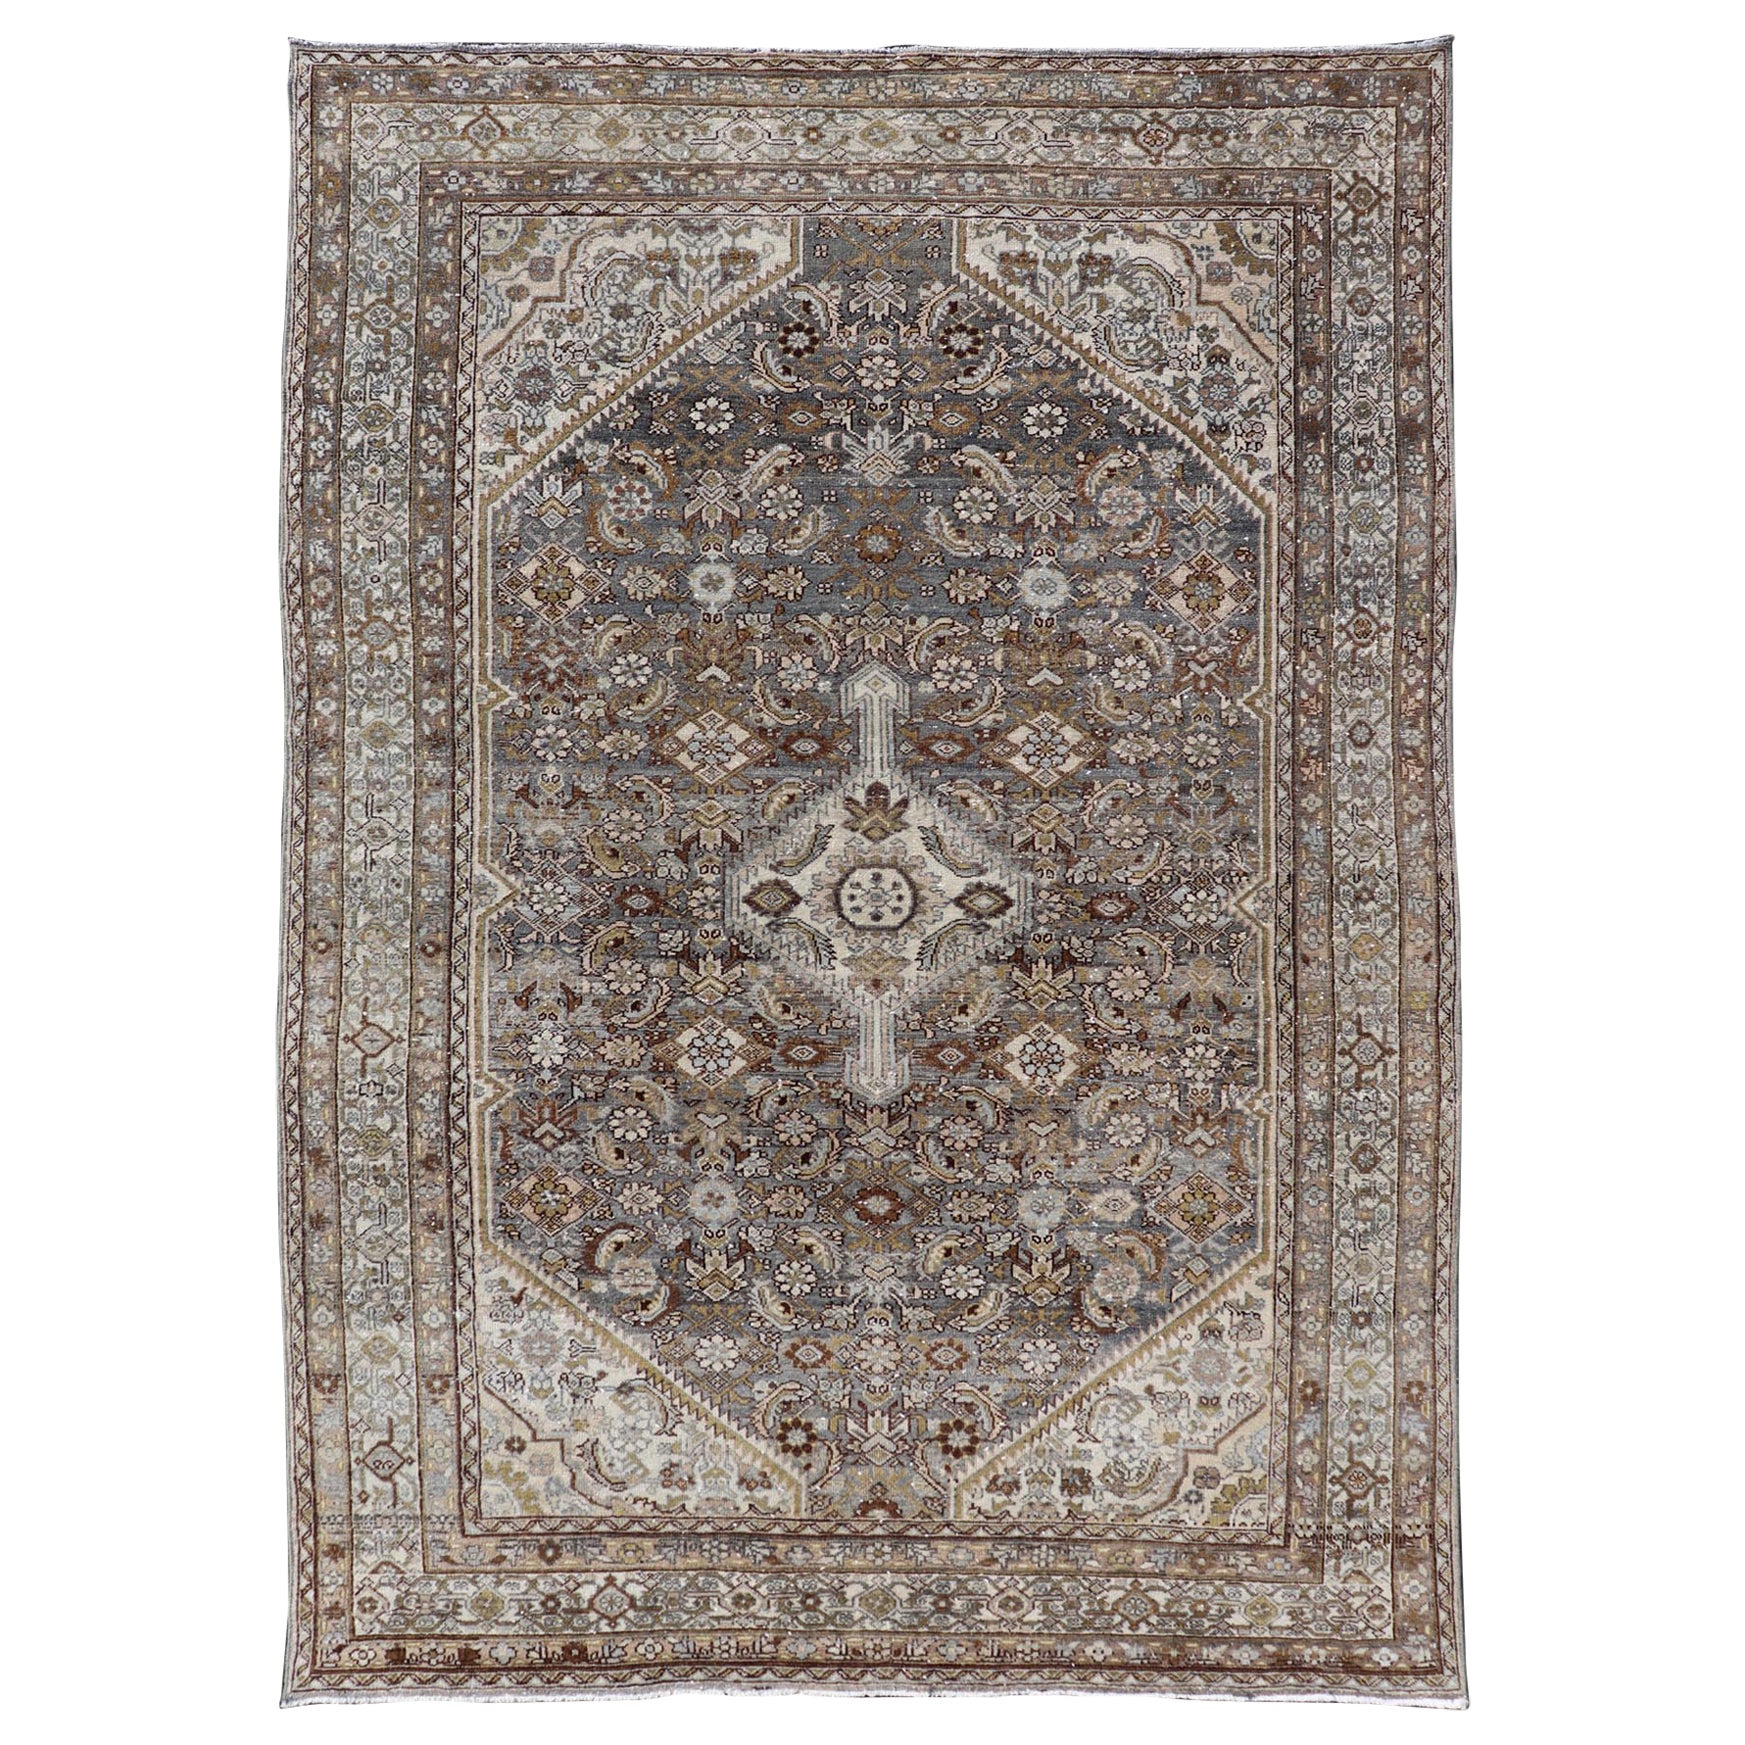 Antique Persian Bibikabad Carpet with Steal Blue, Charcoal, Green, and Brown 